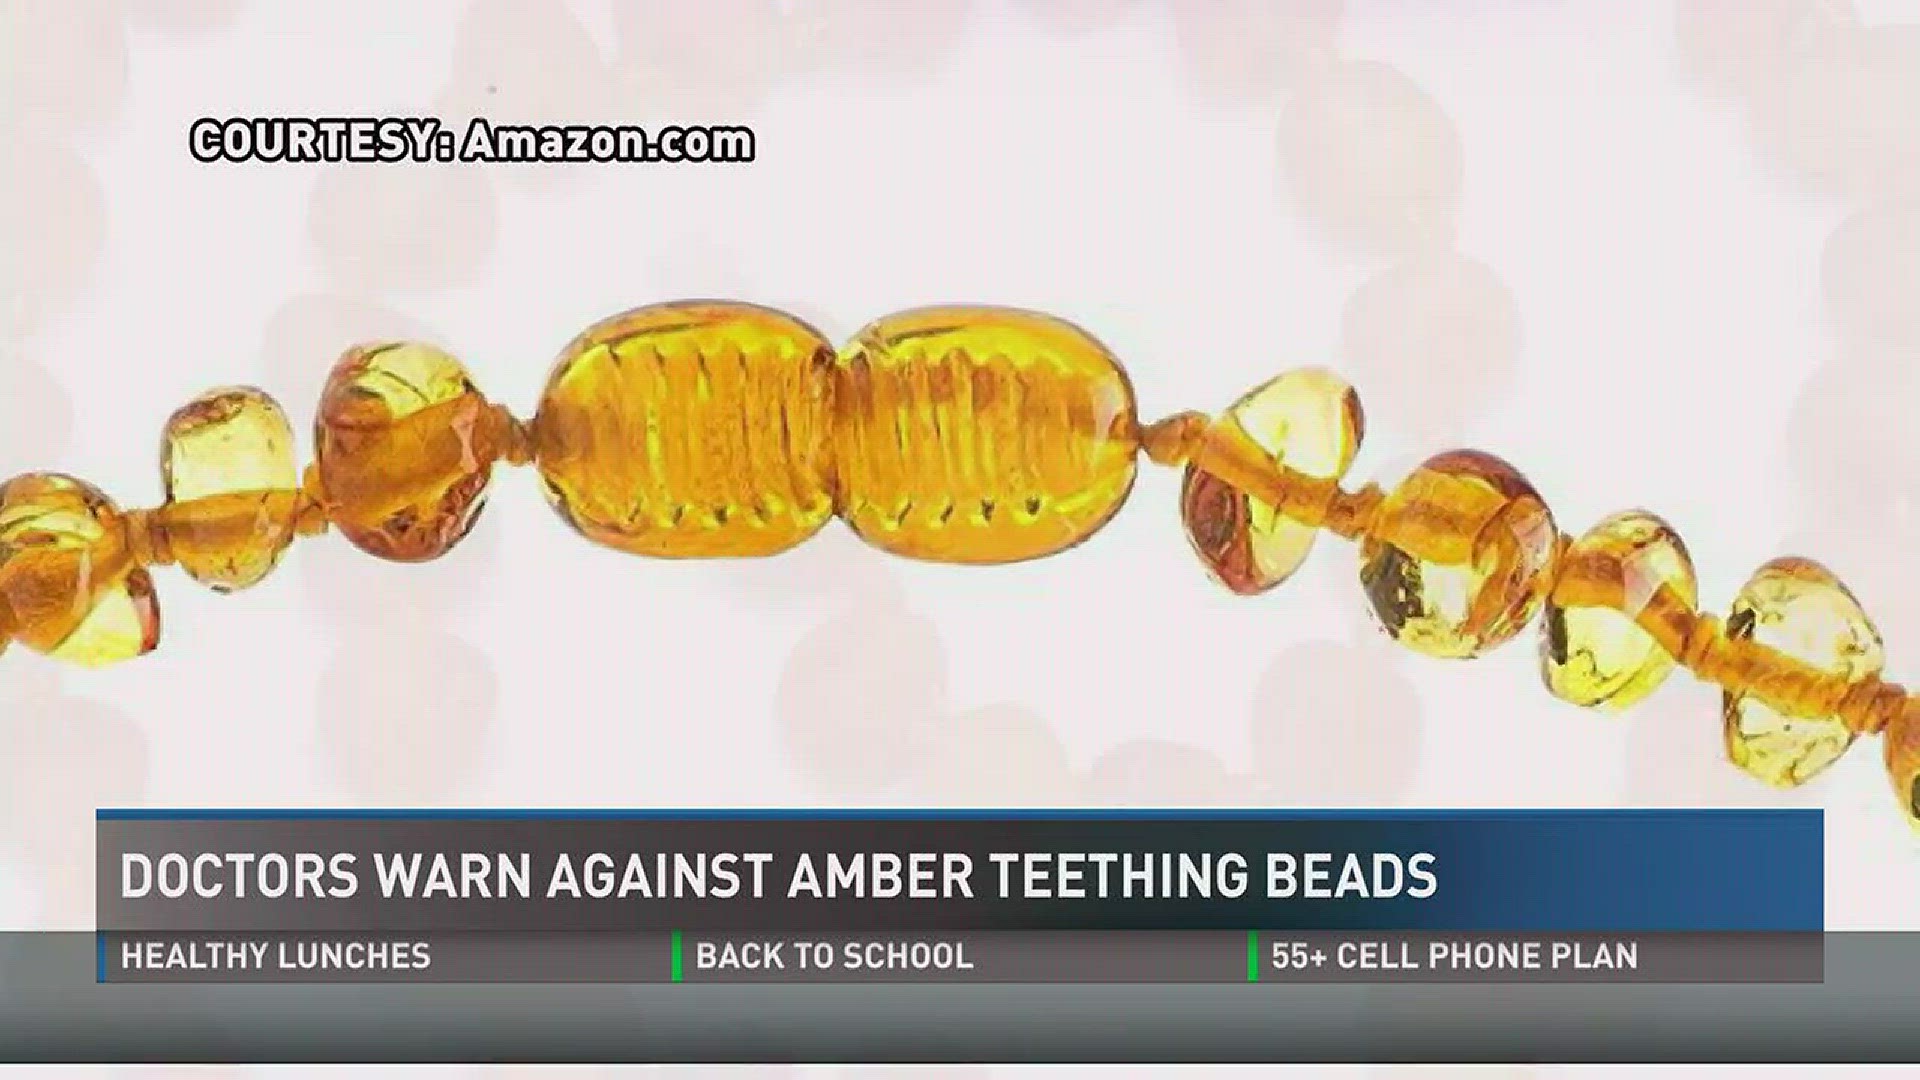 The amber beads are supposed to ease teething pains in infants, but doctors warn they can be dangerous.